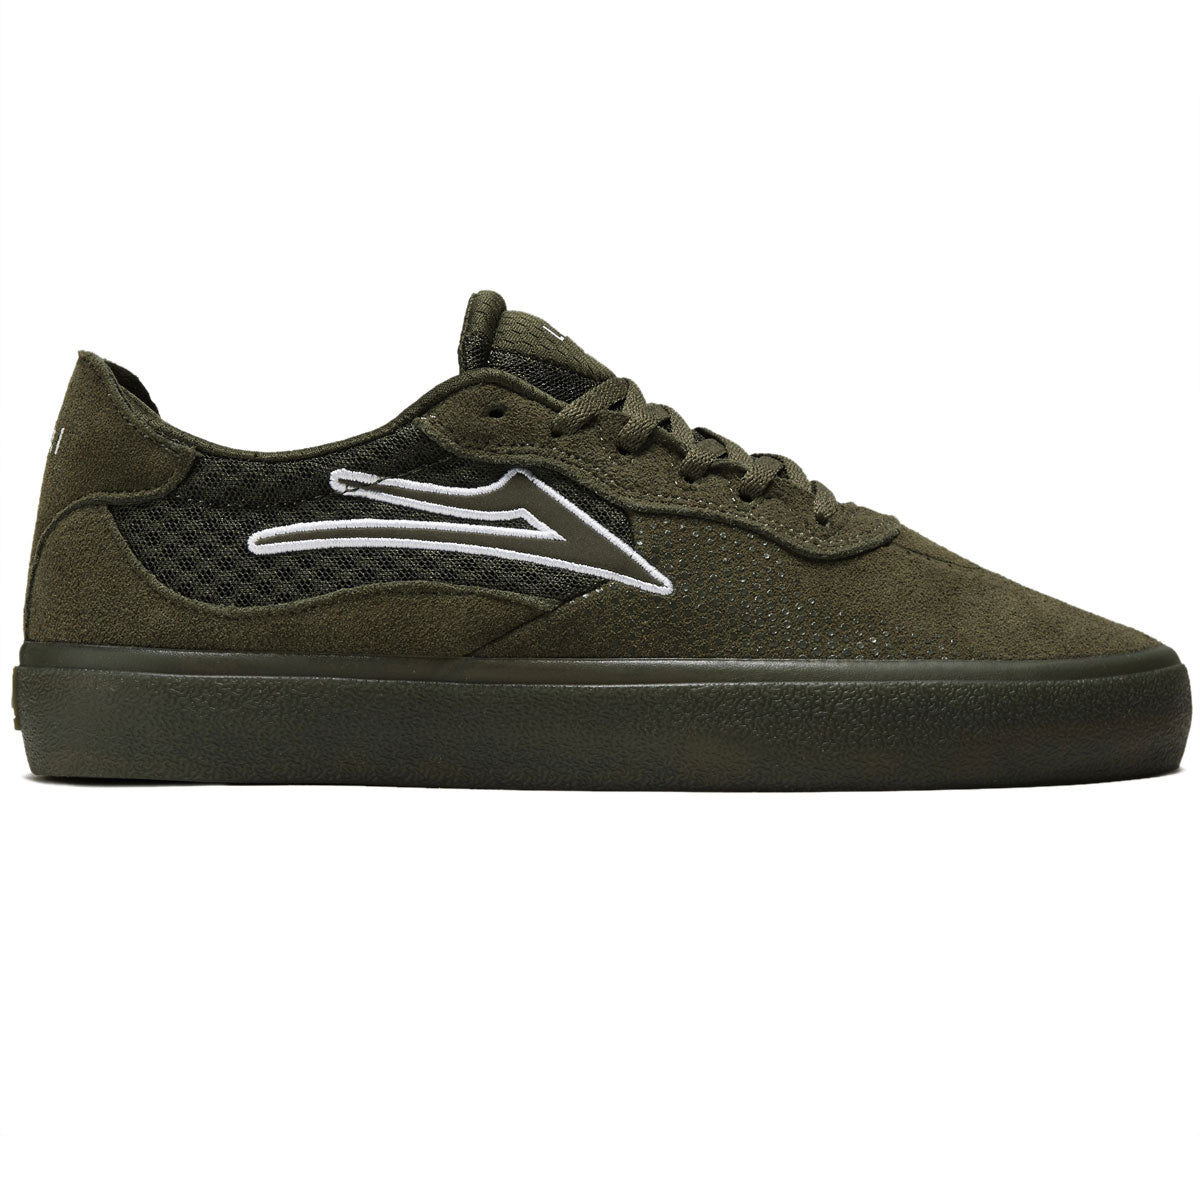 Lakai Essex Shoes - Chive Suede image 1